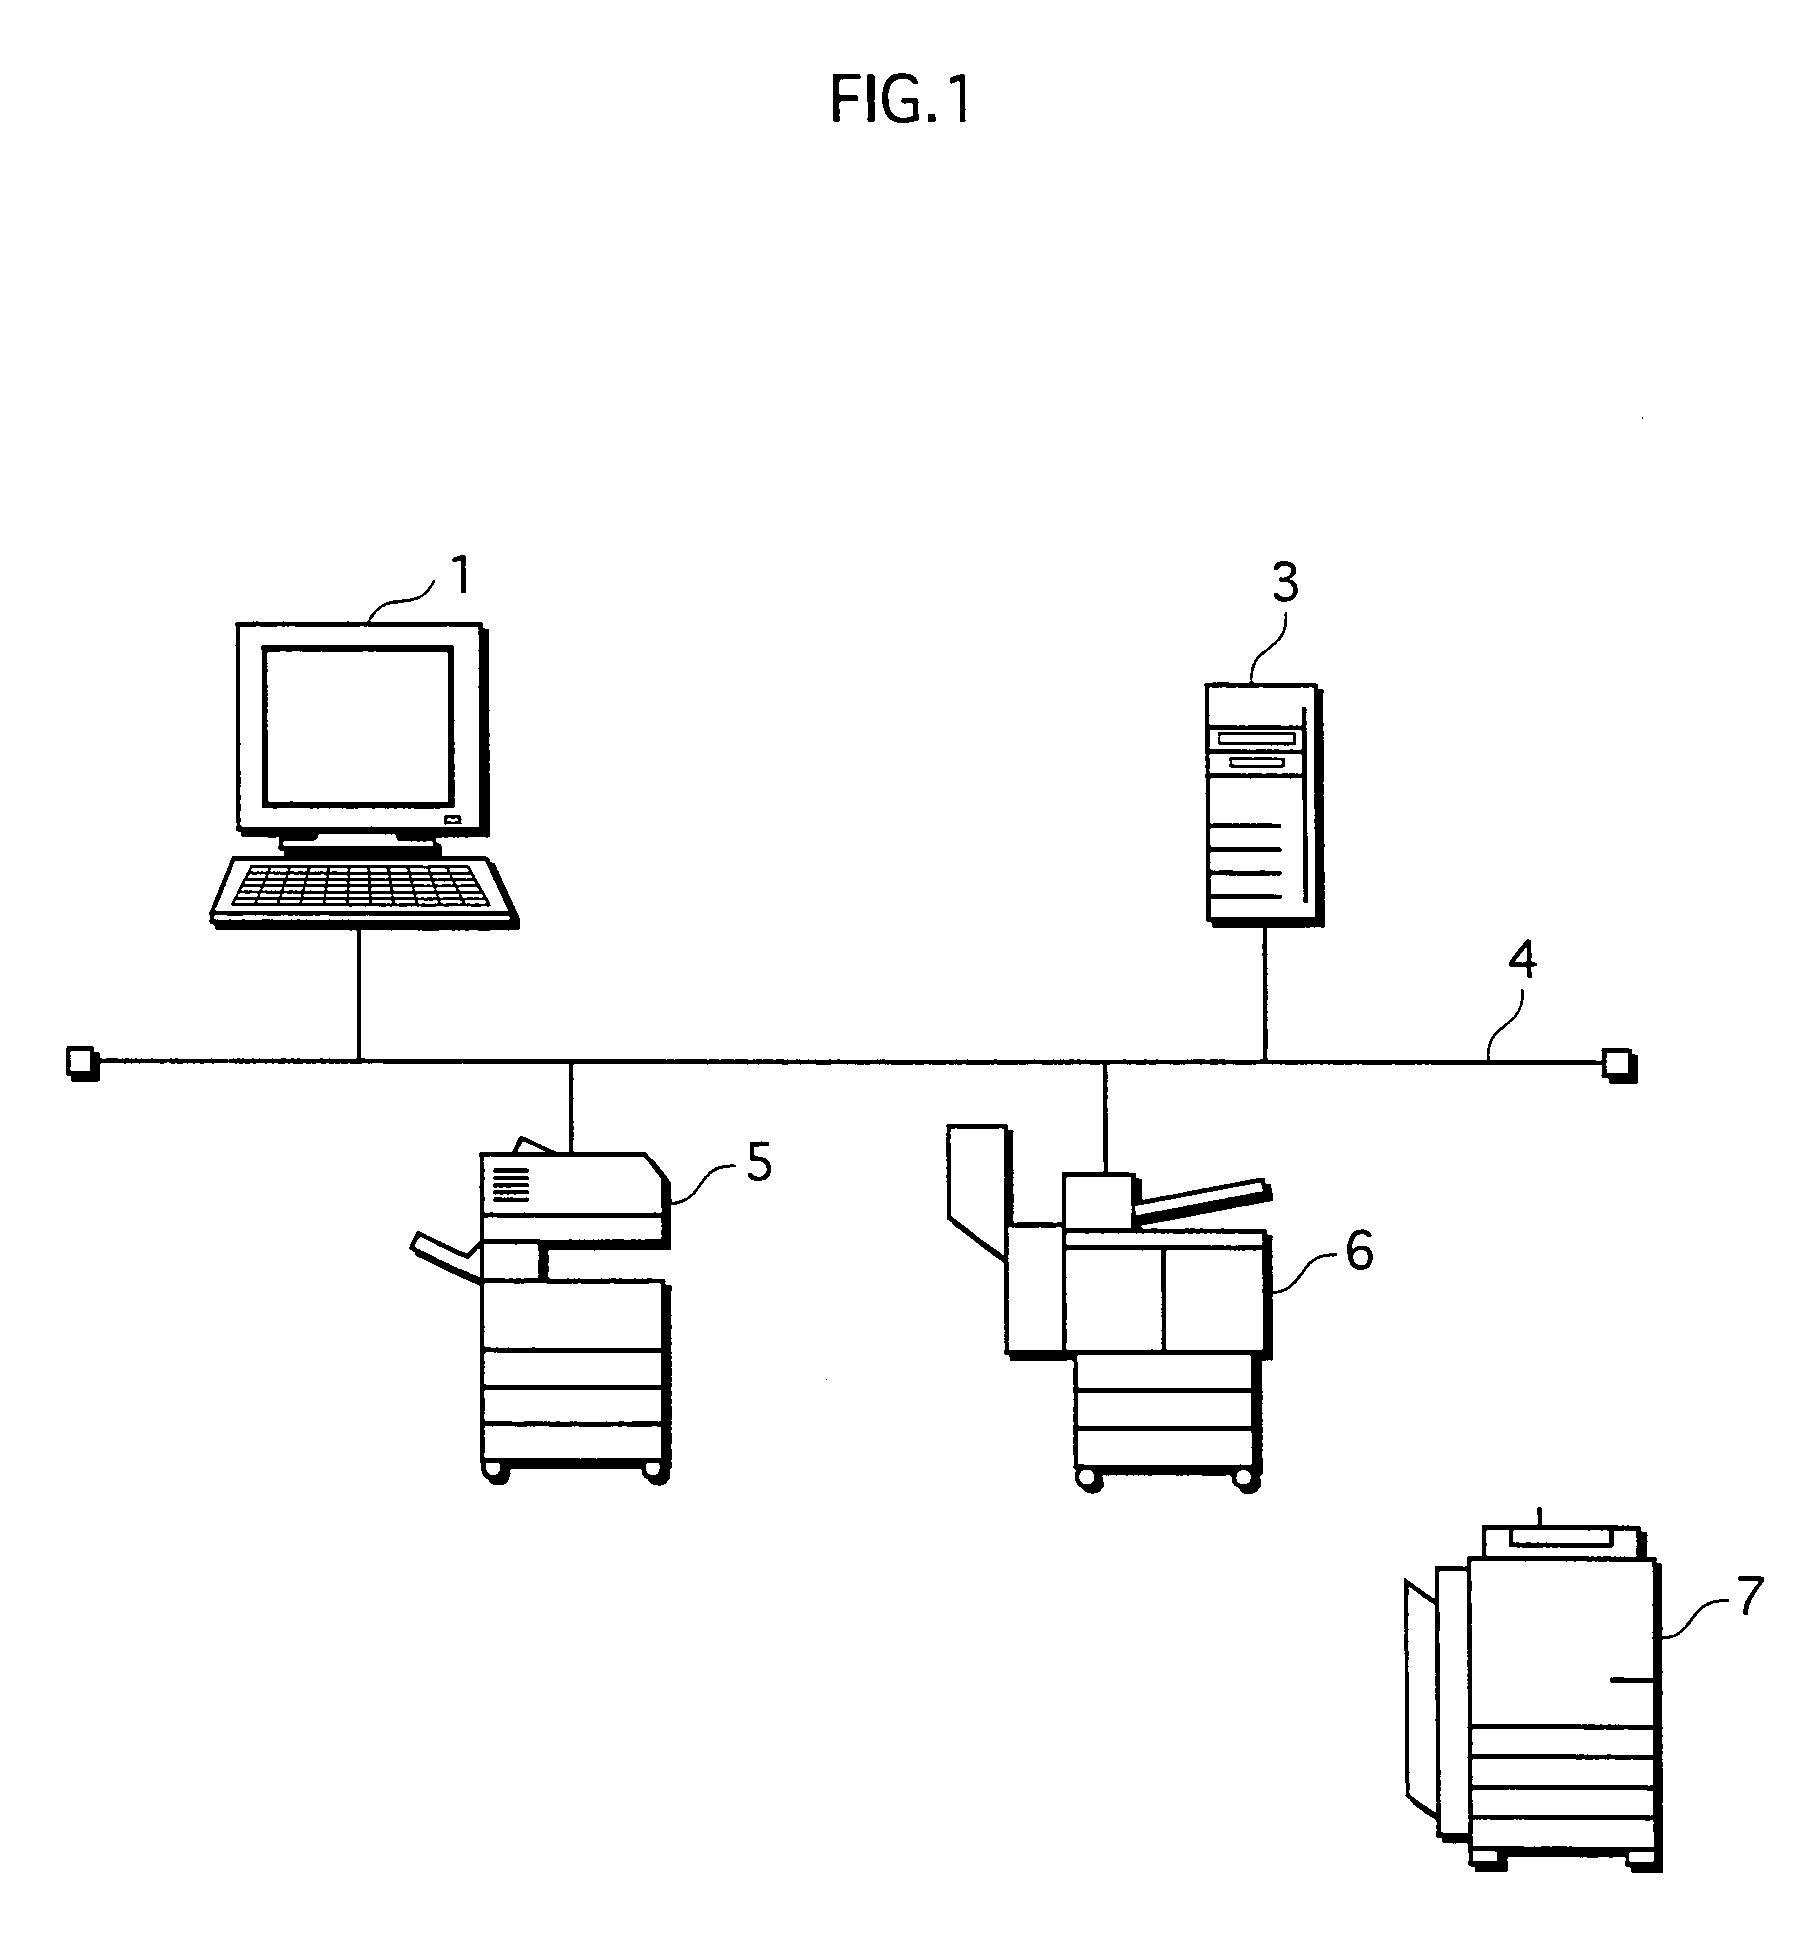 Method for configuring device driver by customizing same user setting using in different image processing devices